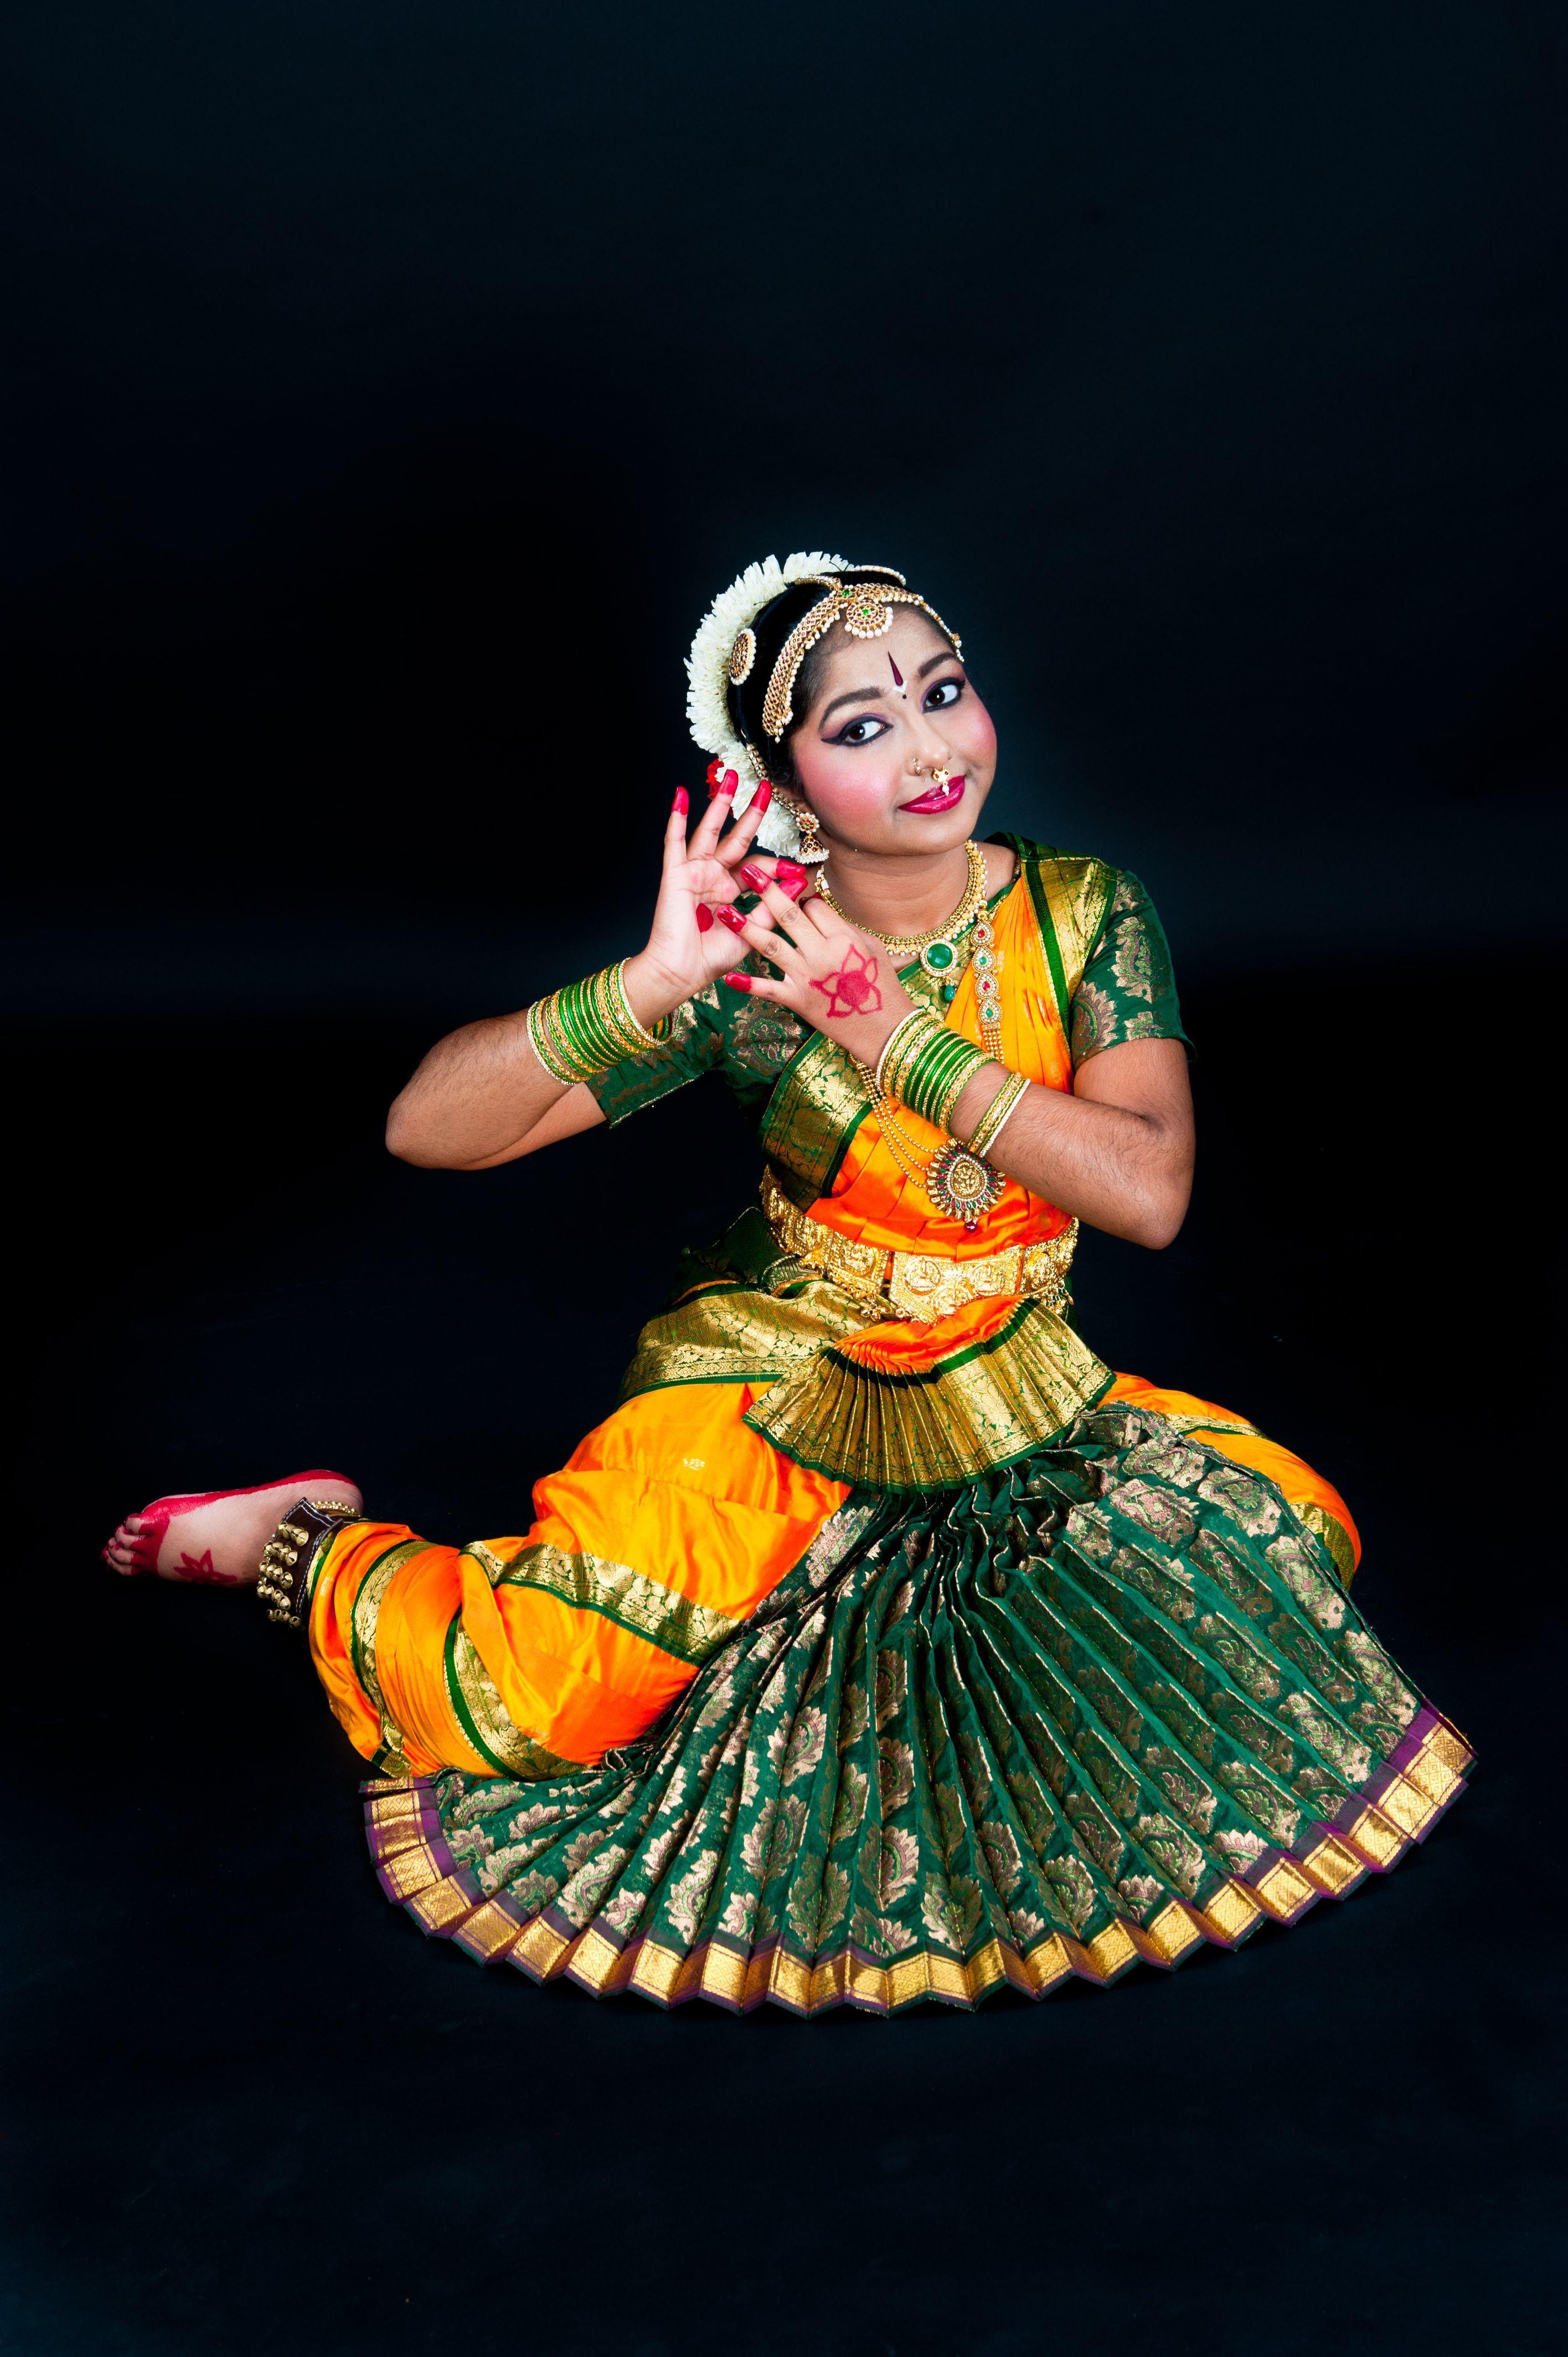 Classical Indian Dance Wallpapers - Top Free Classical ...